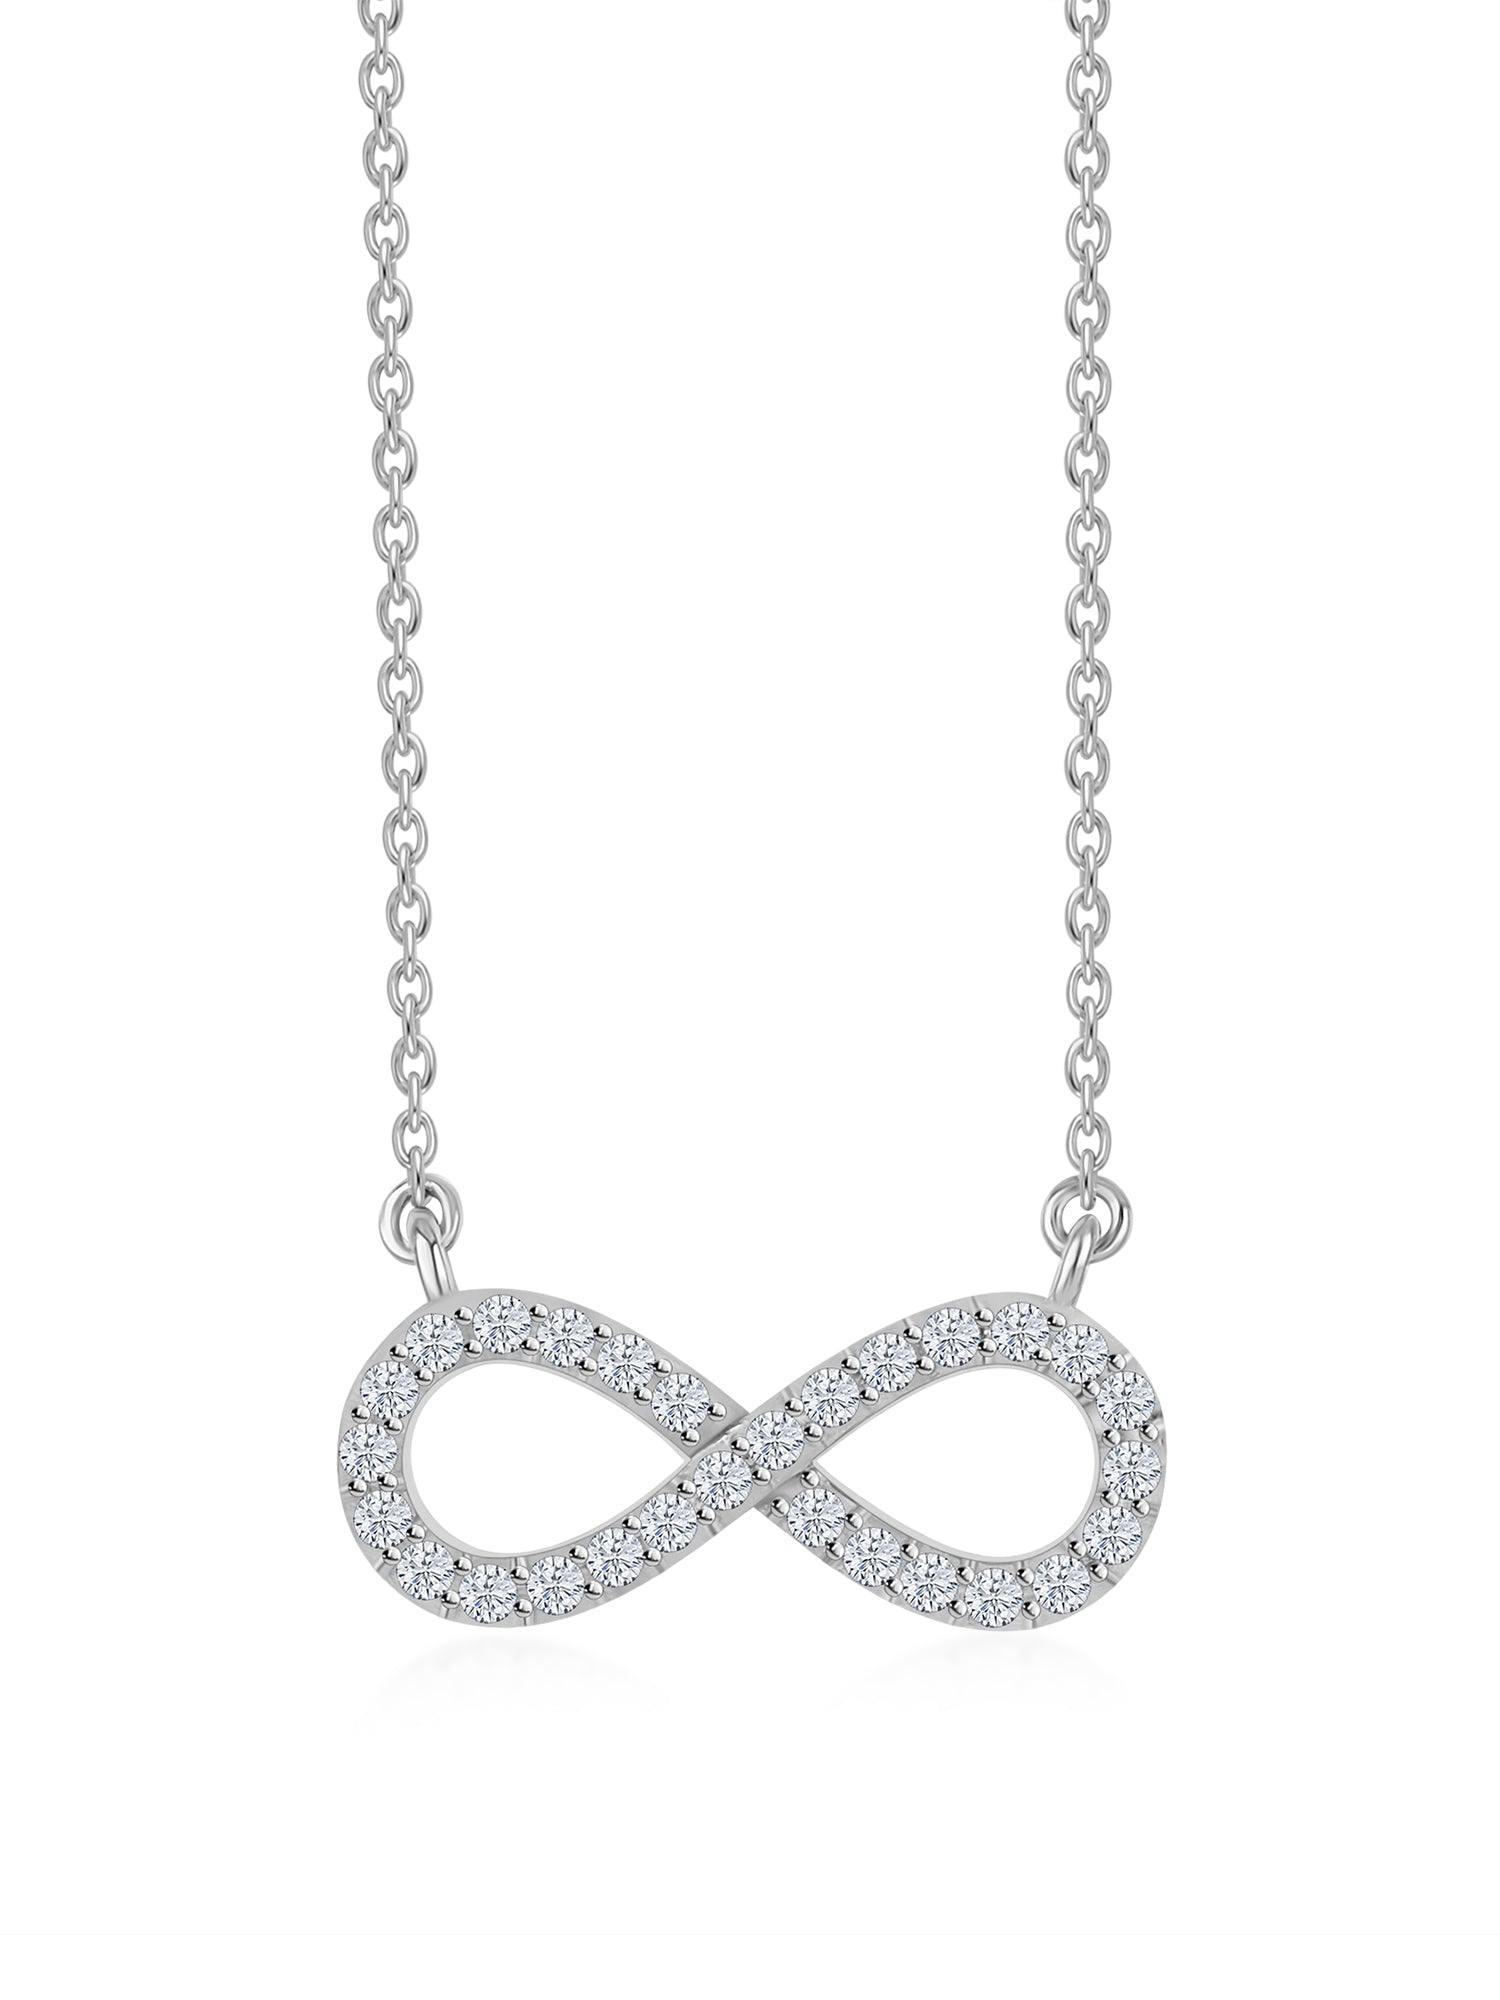 INFINITY DESIGN PENDANT FOR WOMEN WITH CHAIN